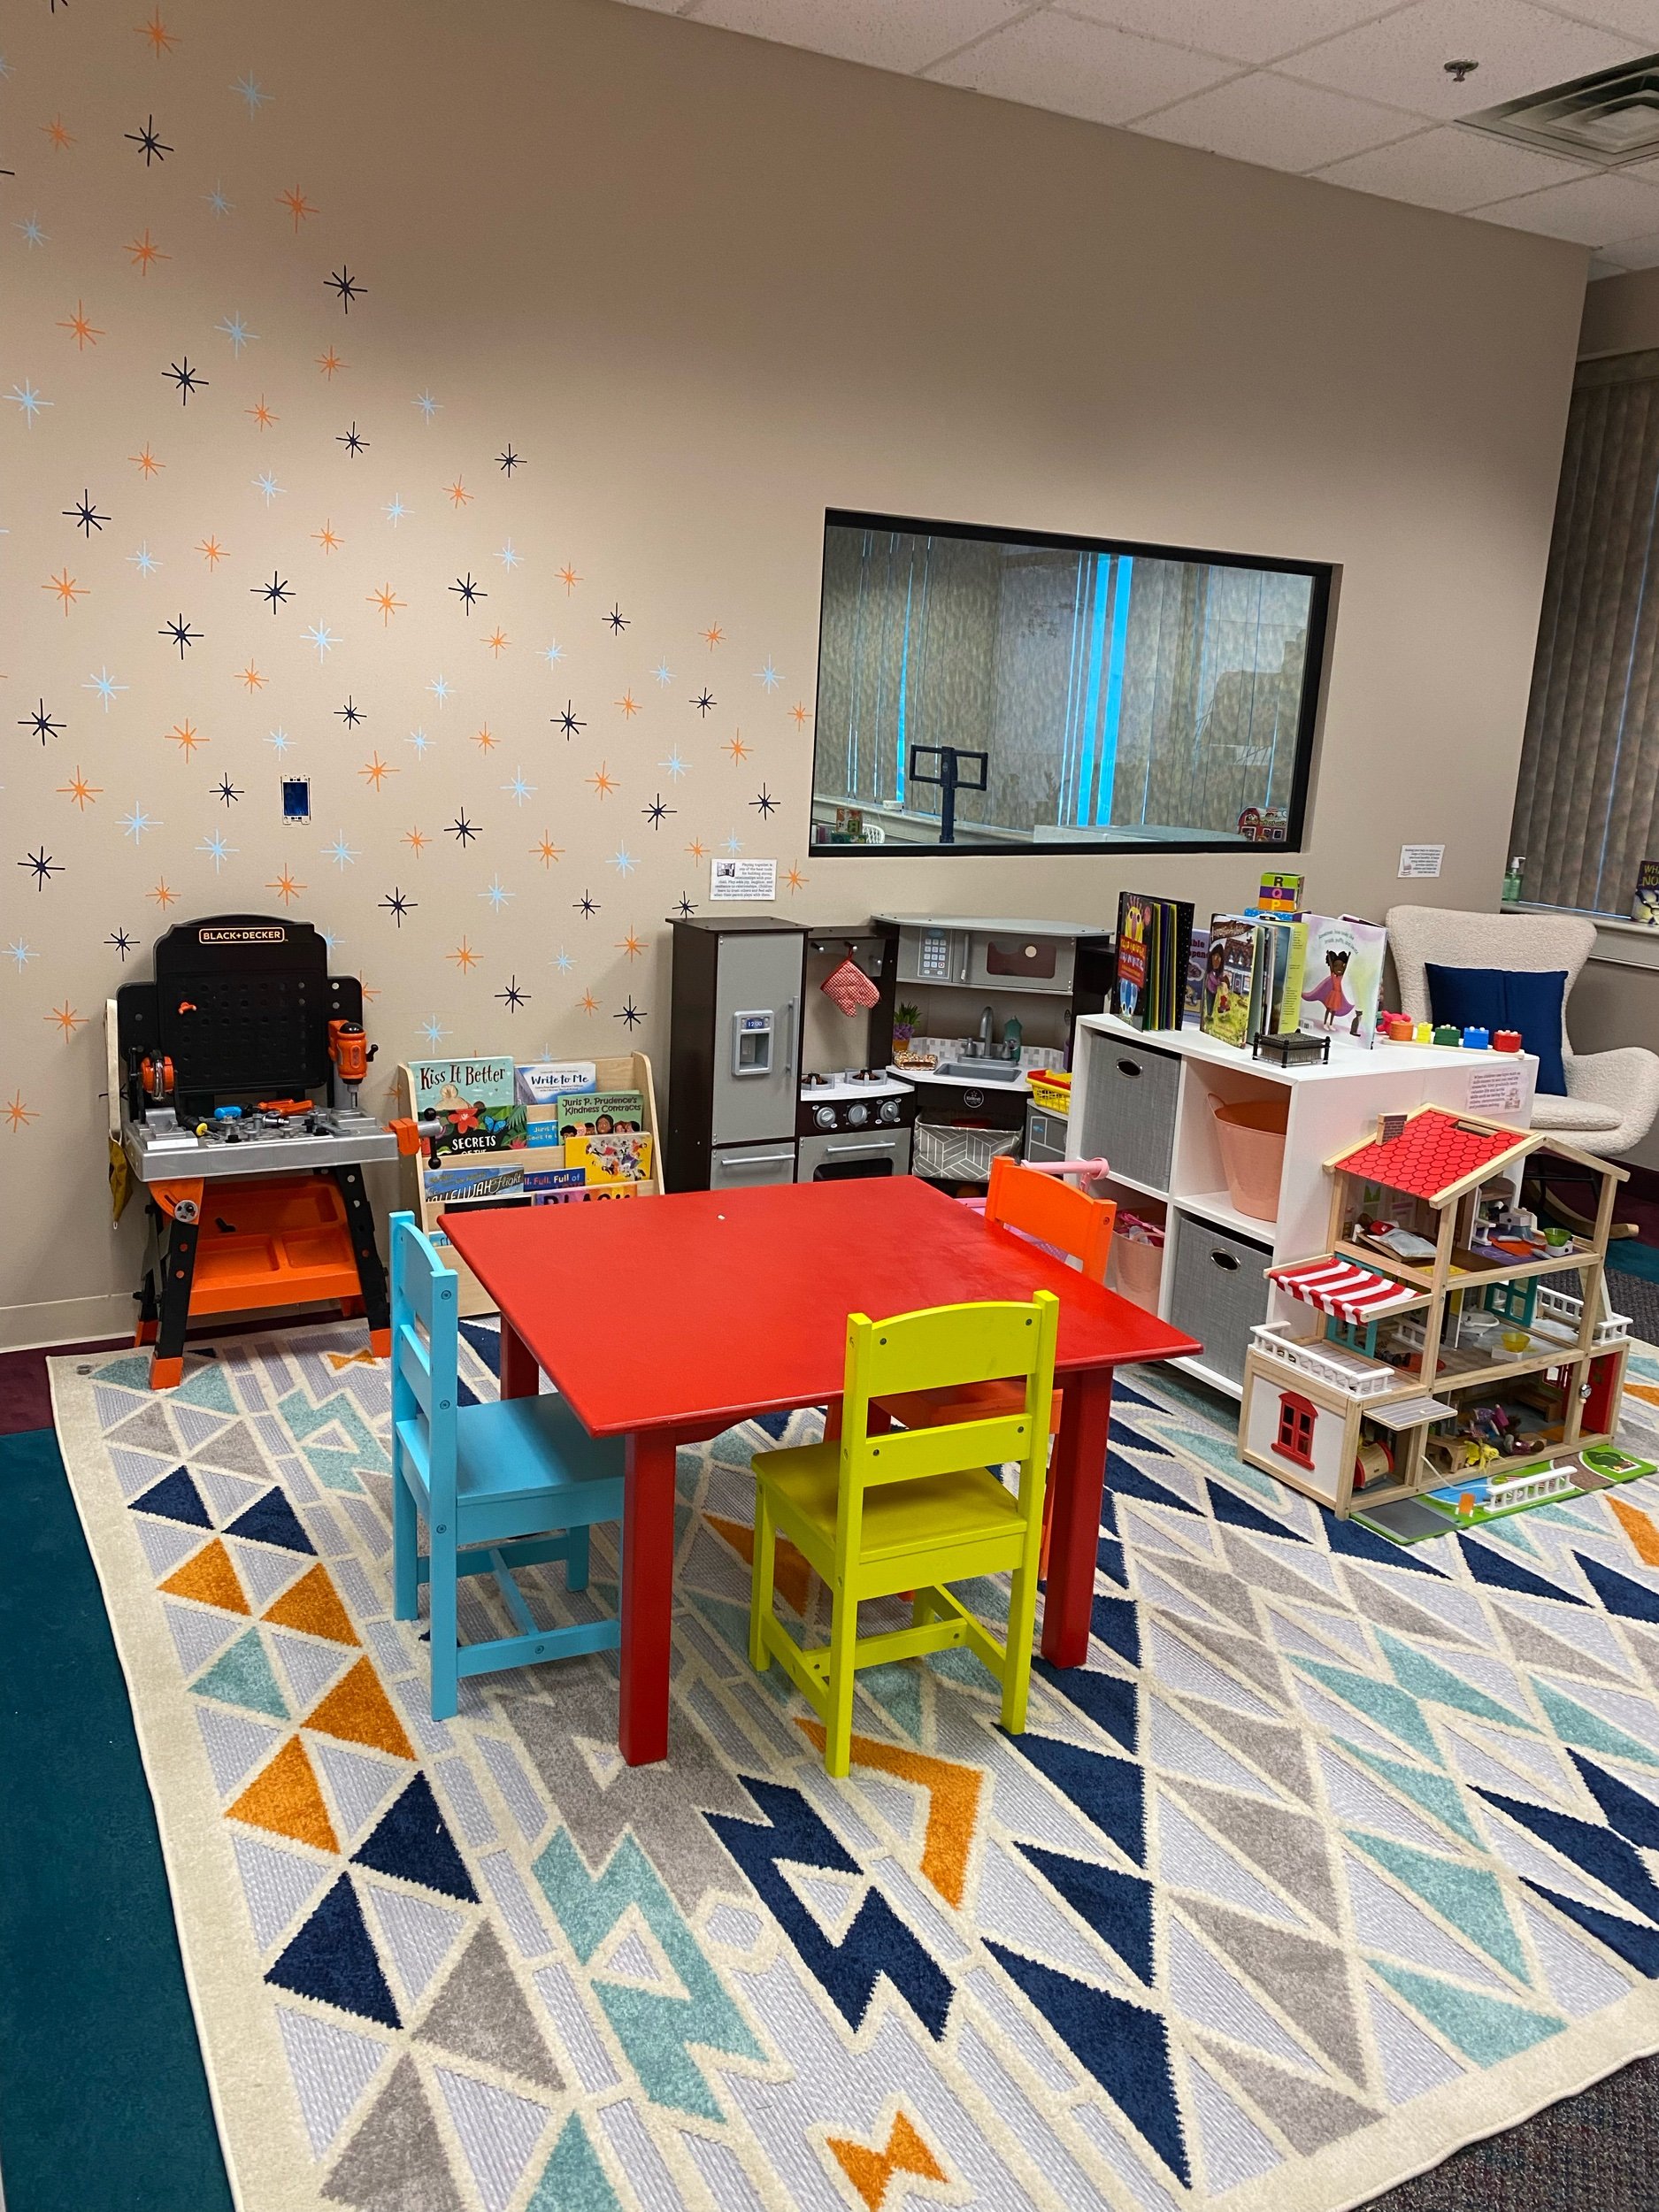  The red table , kitchen set and workbench play set were pieces that the agency wanted to remain in the room. We were able to incorporate them into the design of the room and think it’s important to respect the wishes of the staff who  use the room. 